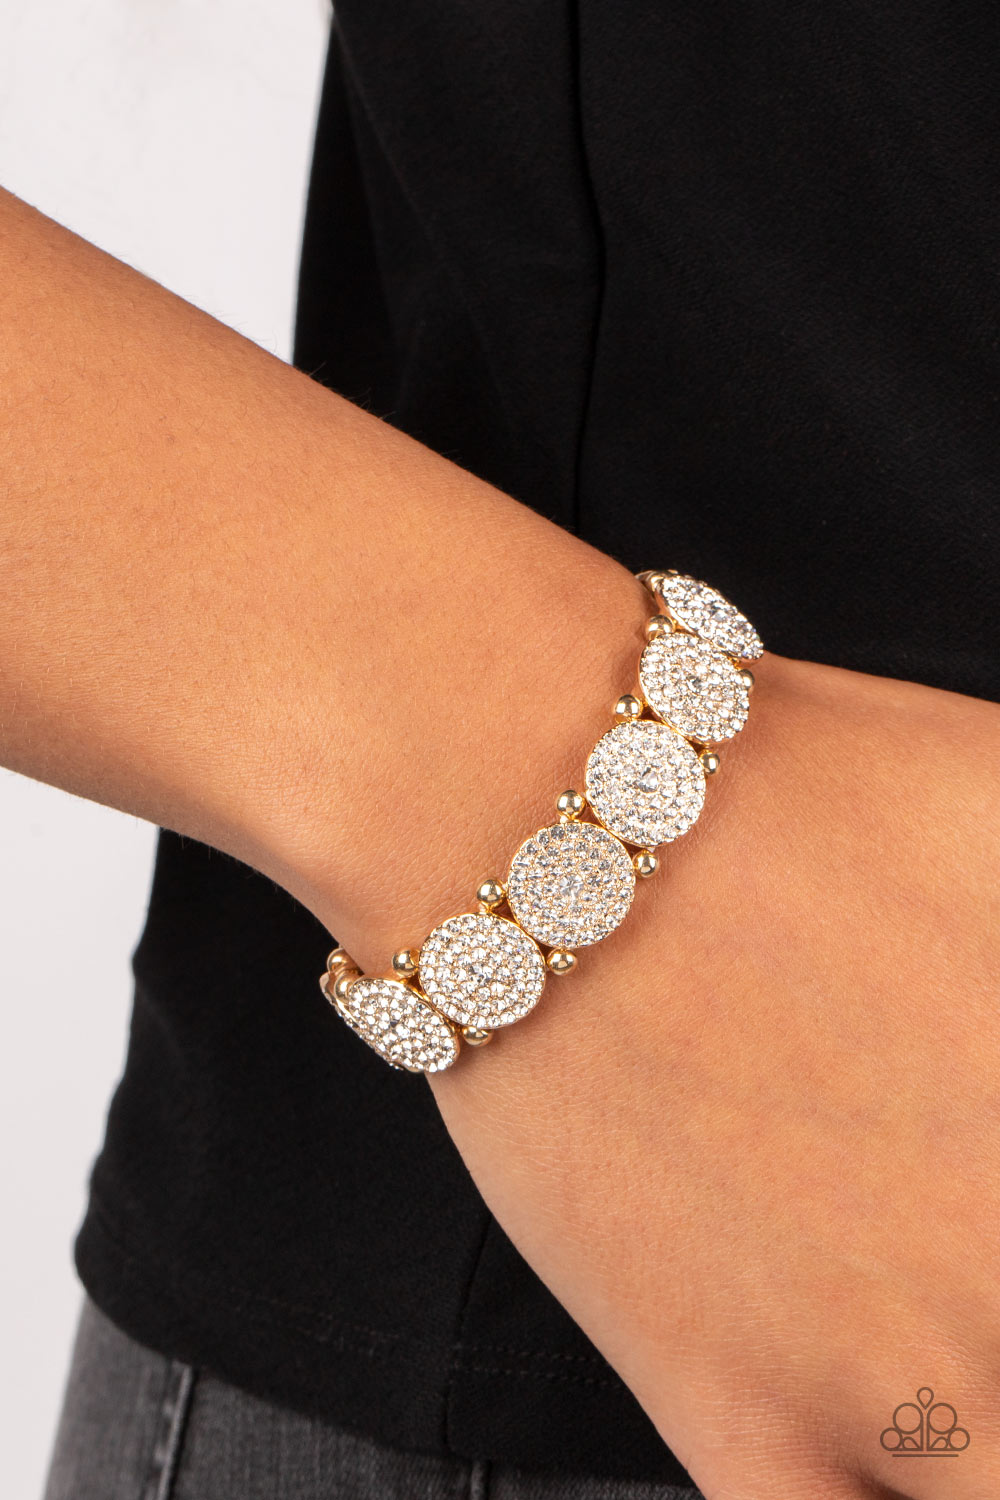 Palace Intrigue Gold Bracelet - Paparazzi Accessories  Separated by pairs of gold beads, icy white rhinestone encrusted gold frames glitter along stretchy bands around the wrist for a timeless twinkle.  Sold as one individual bracelet.